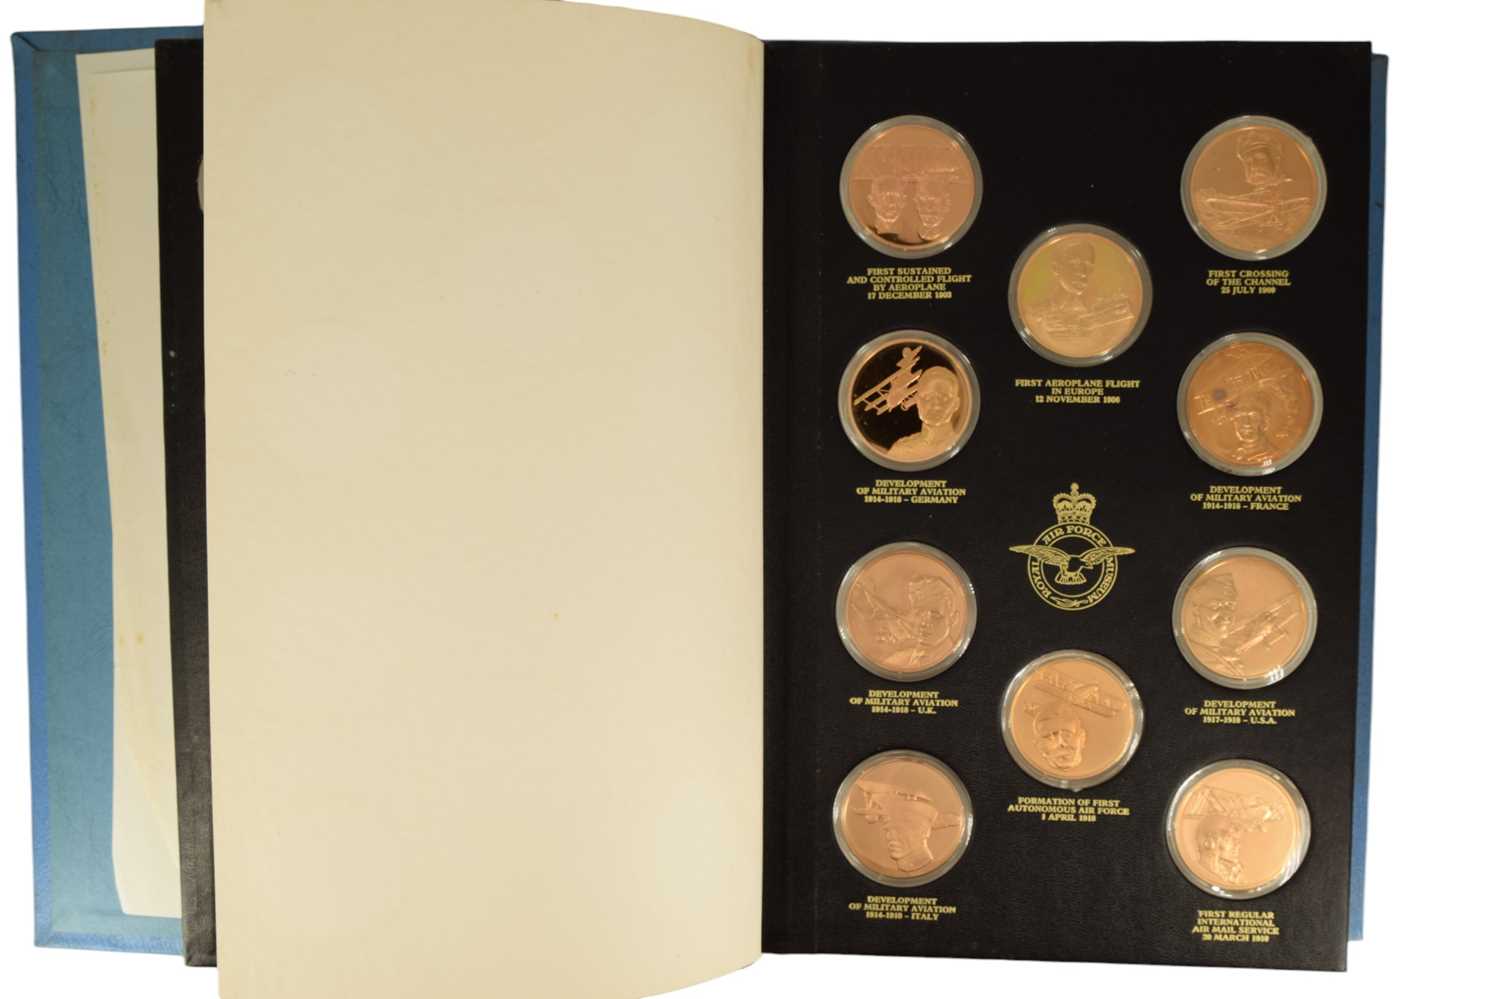 The History of Man in Flight bronze medal album for The Royal Airforce Museum by Franklin Mint Ltd - Image 8 of 15